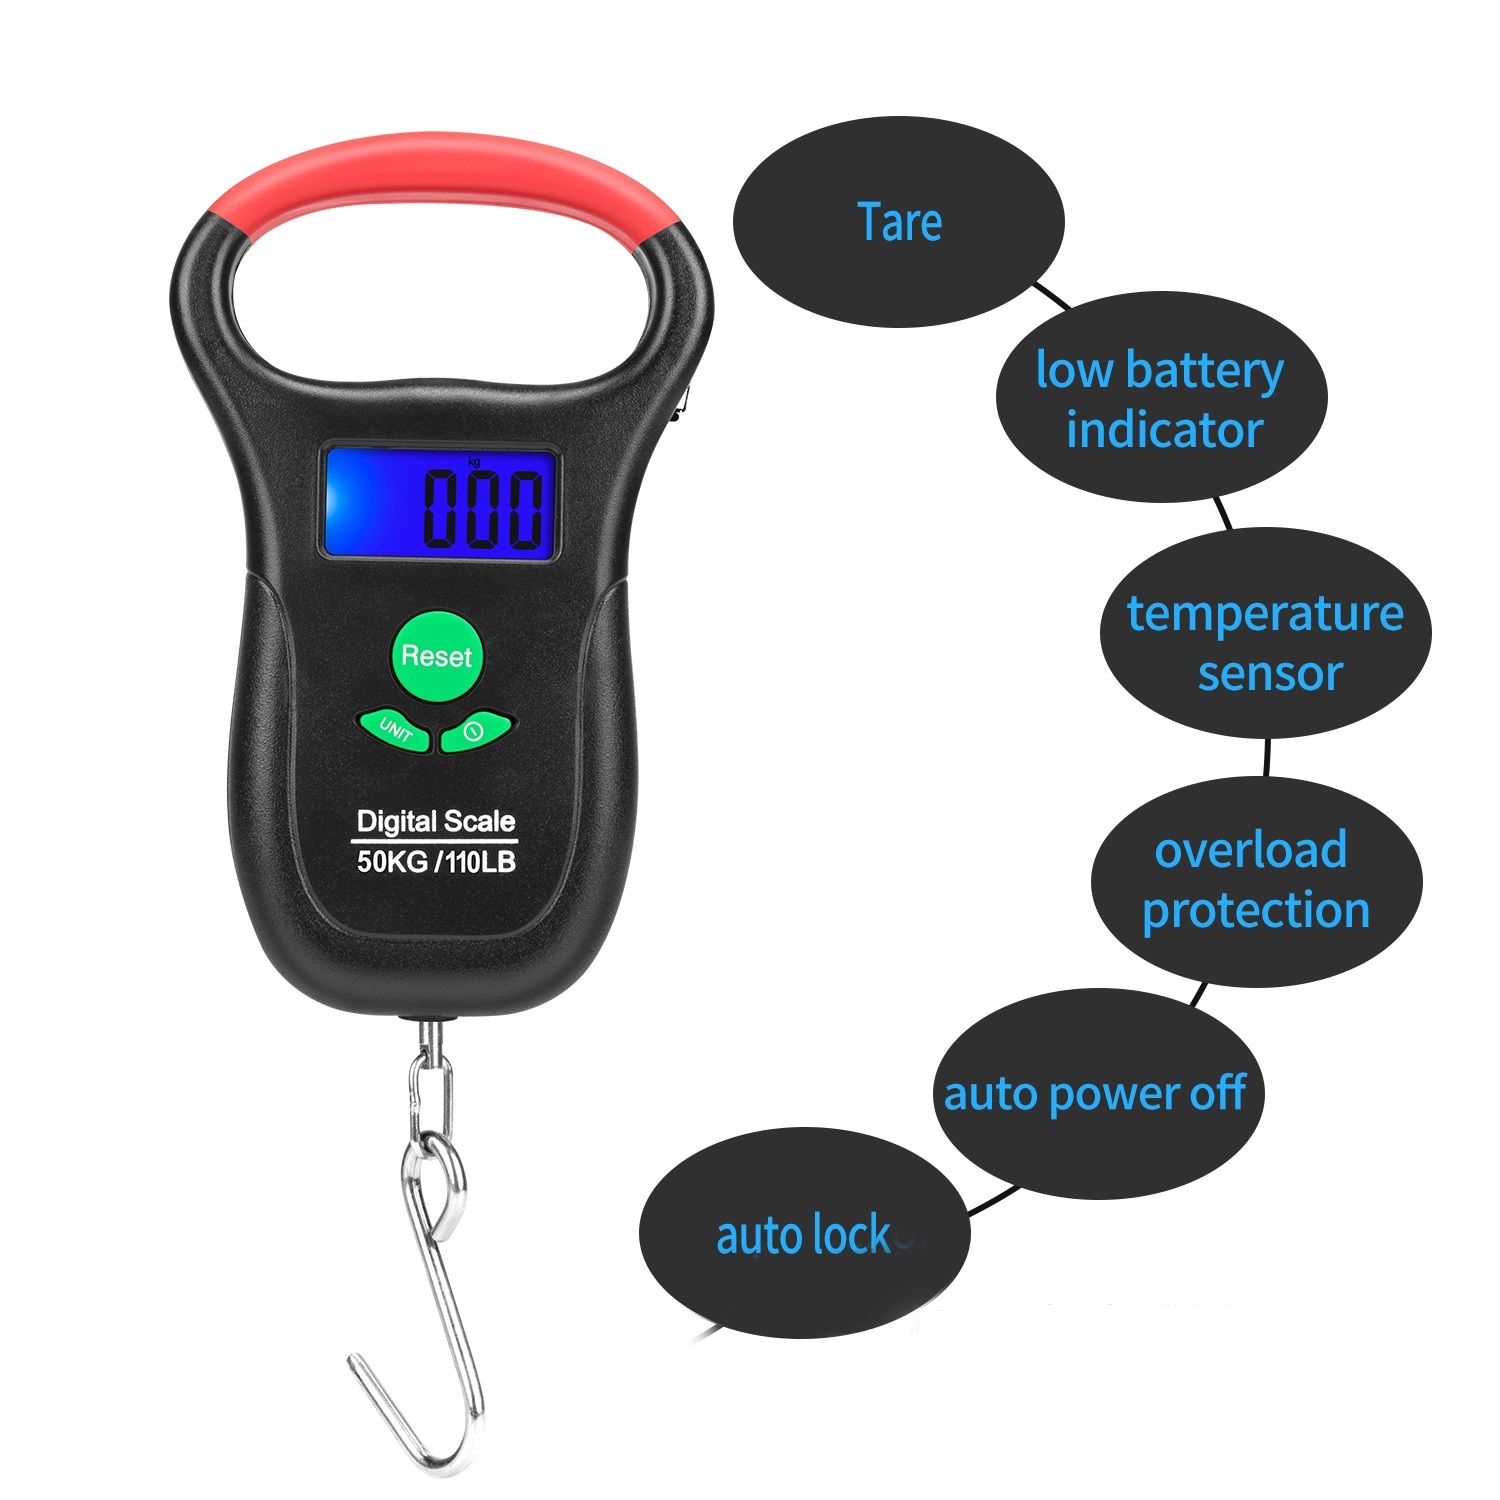 CS1016 Airline Digital Baggage Weighing Scales Travel Weigh Portable Digital Luggage Scale with Strap